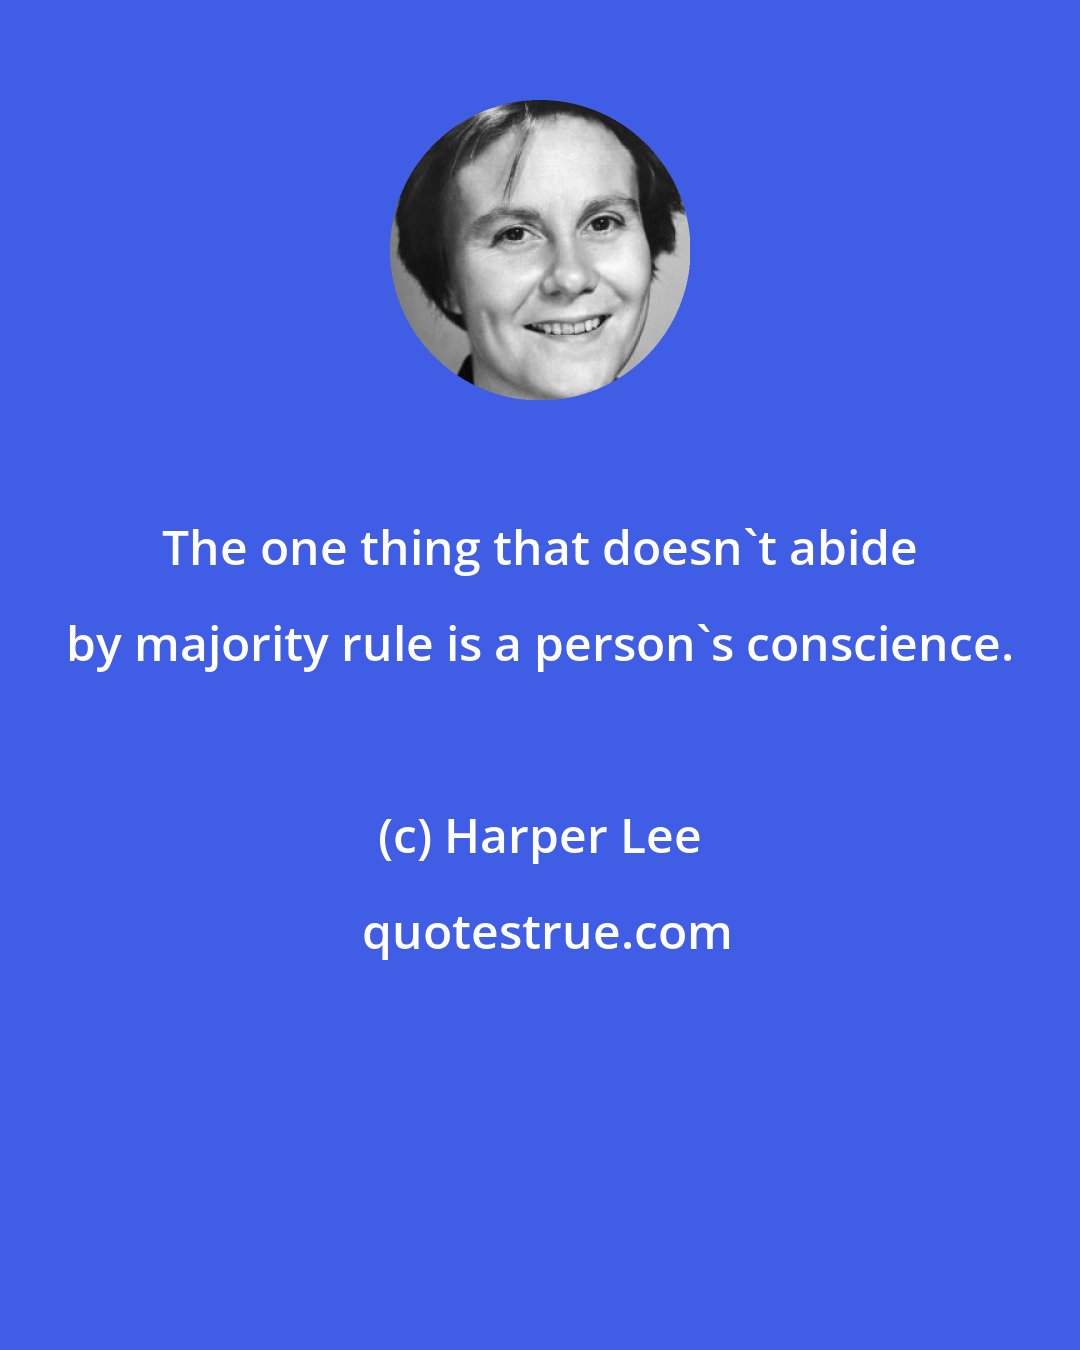 Harper Lee: The one thing that doesn't abide by majority rule is a person's conscience.